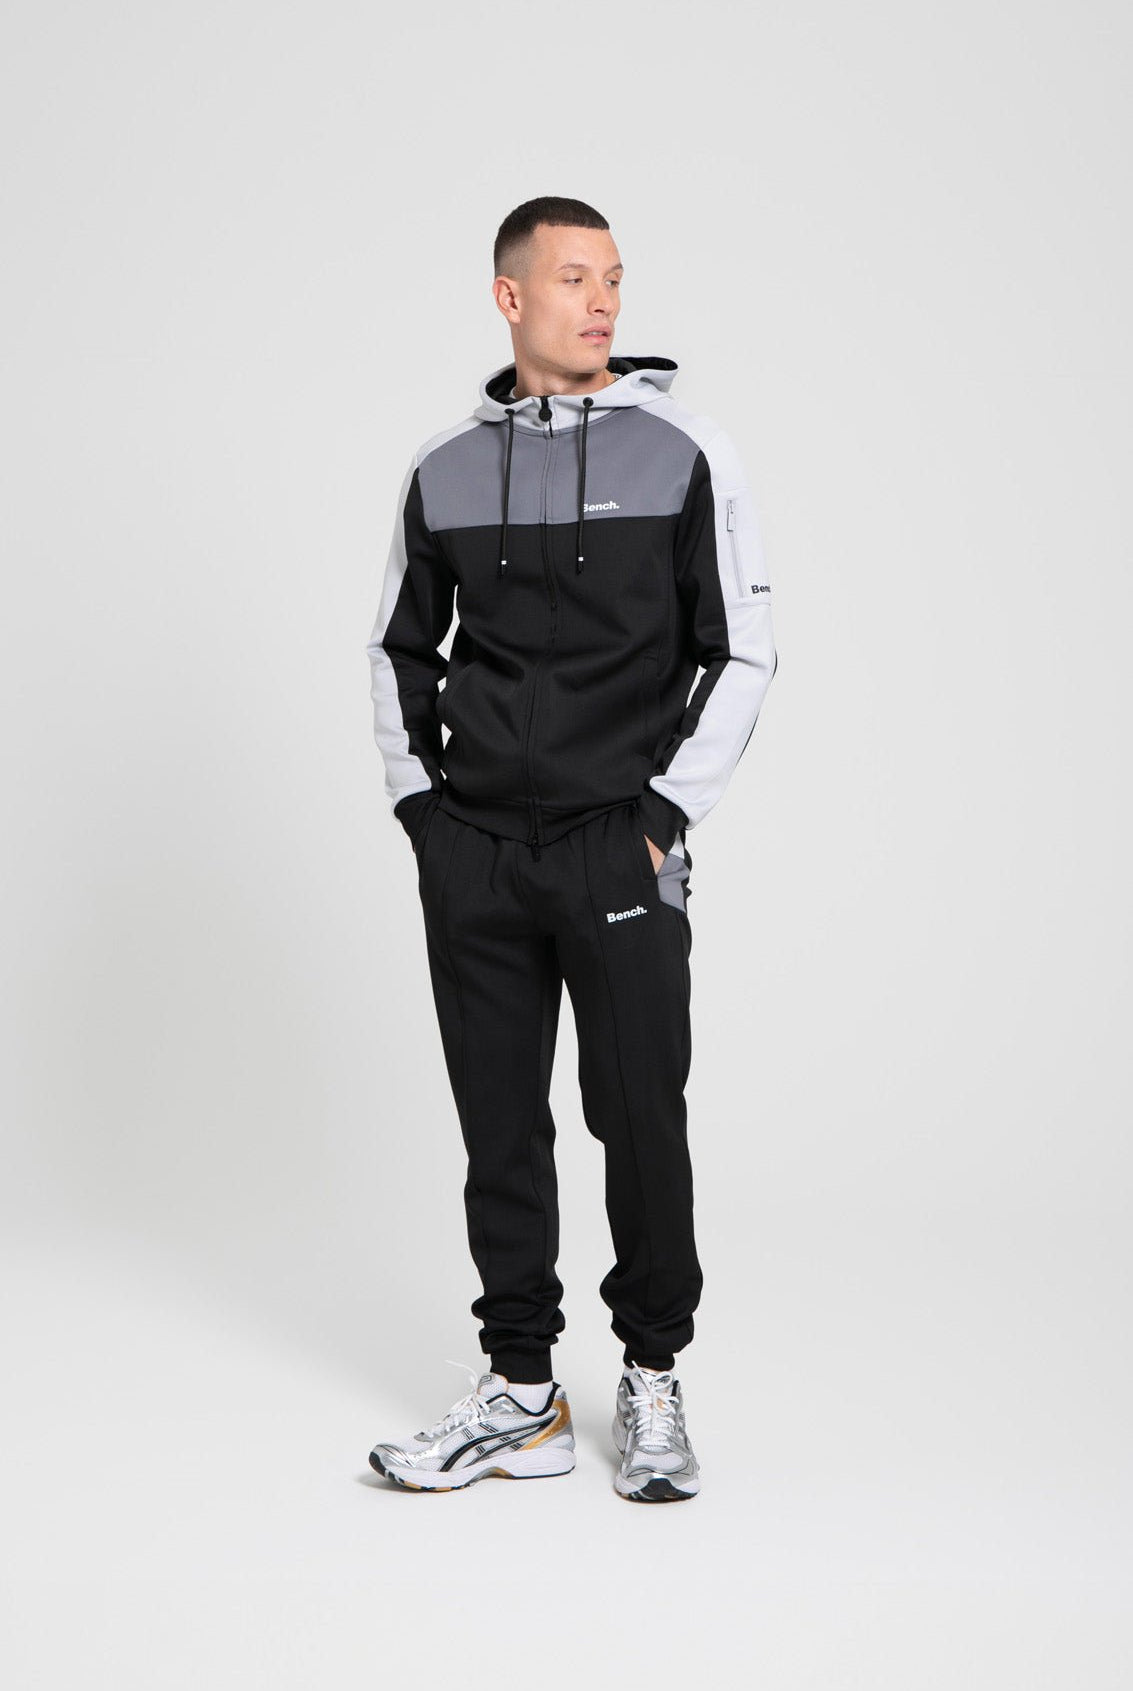 Mens 'RONTELL' 2pc Tracksuit - BLACK - Shop at www.Bench.co.uk #LoveMyHood